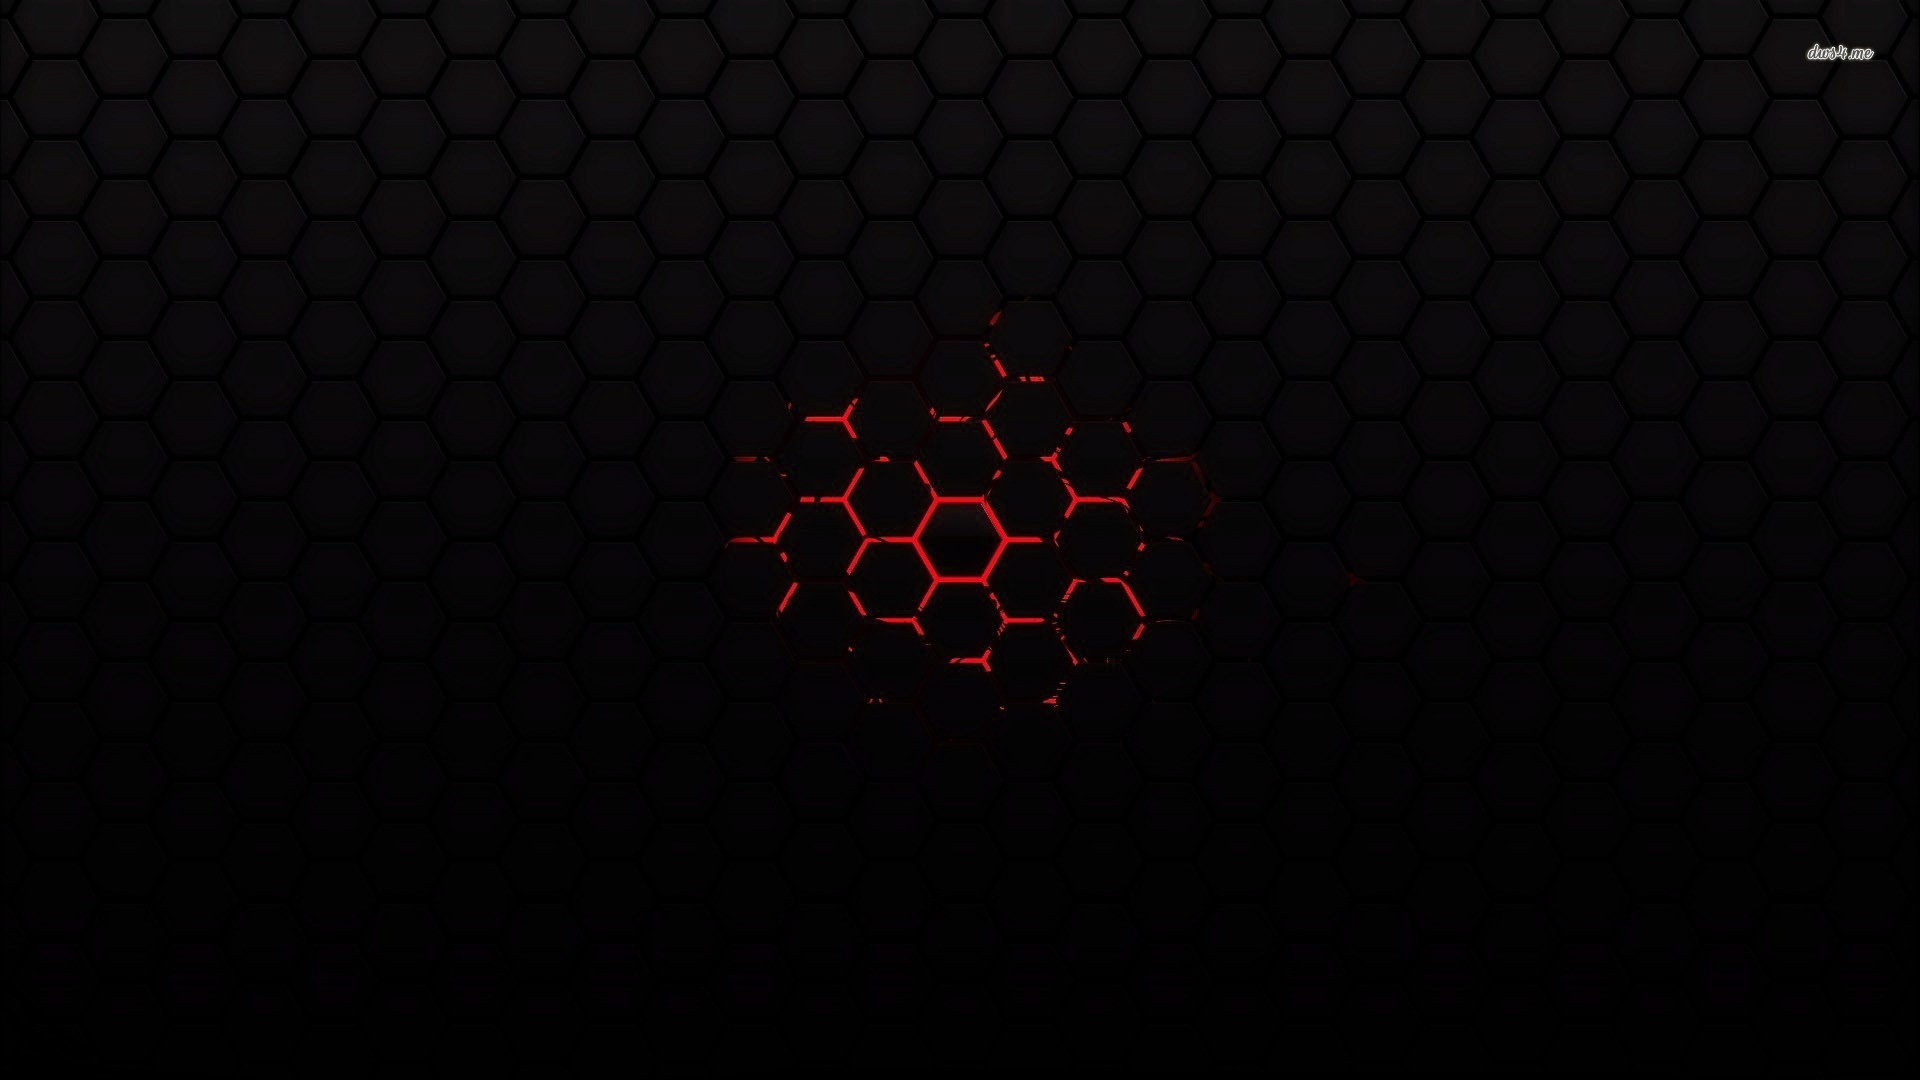 Red on black honeycomb pattern wallpaper 1280x800 Red on black